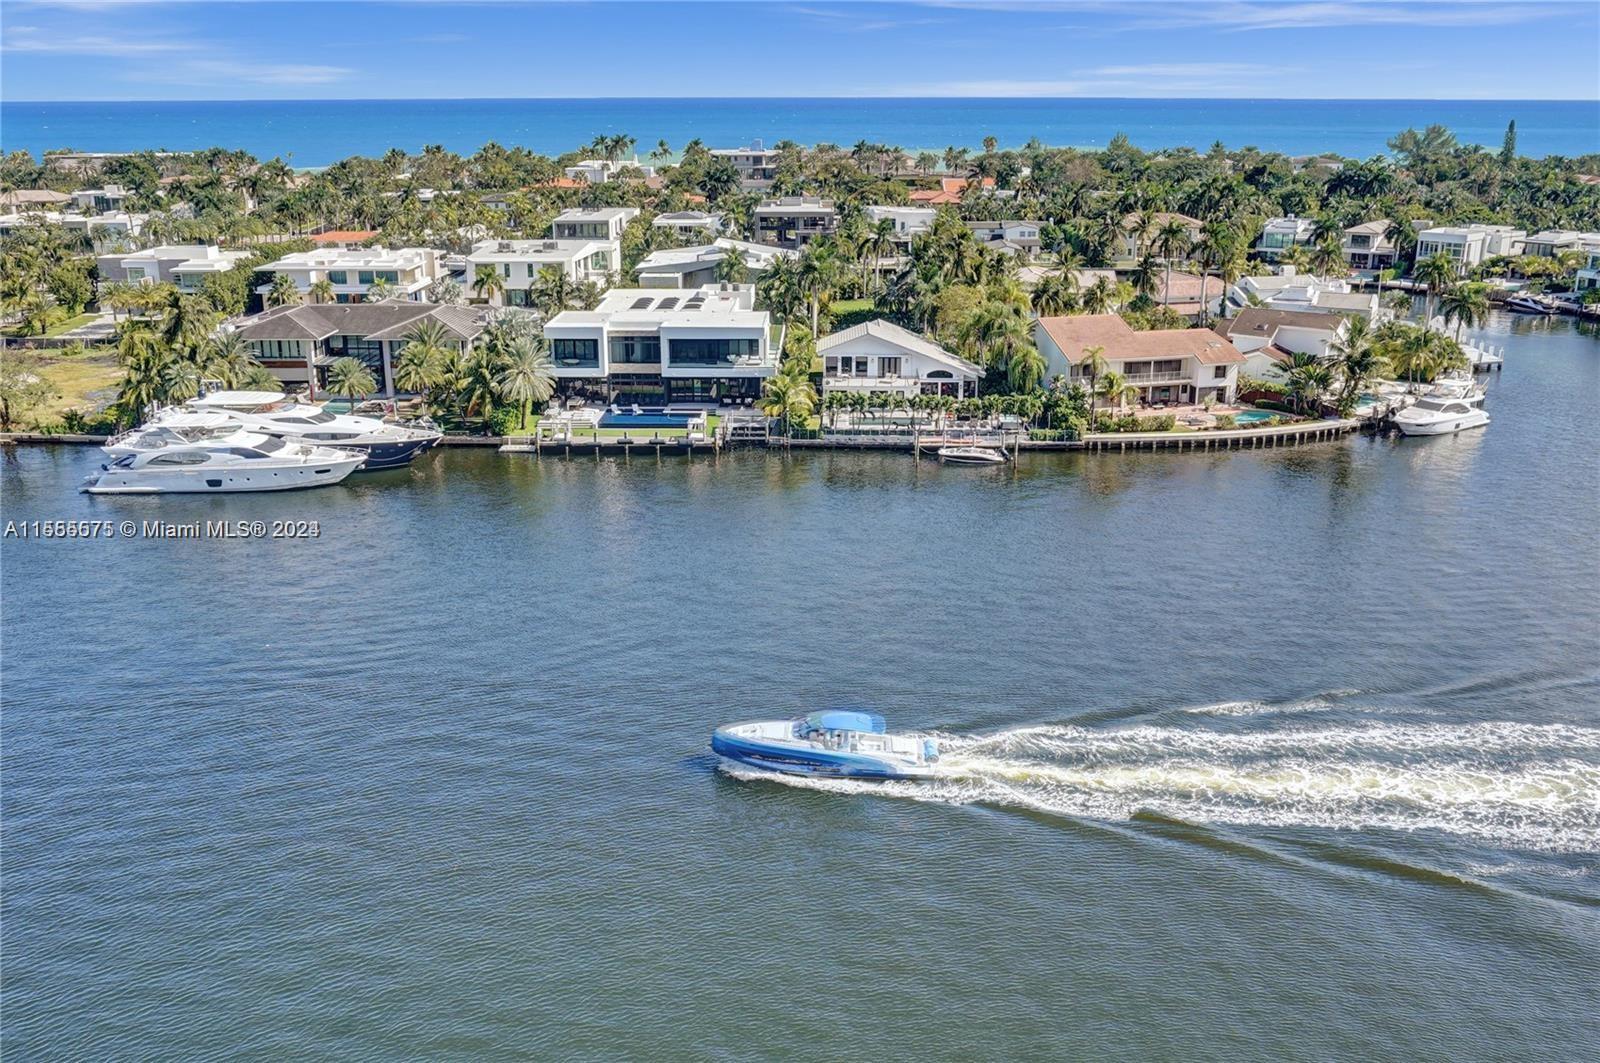 Step into this expansive, waterfront, flow-through unit with magnificent unobstructed Direct Ocean, Intracoastal & PGA Golf Course Views! This 2,973 SQ FT of luxury living space offers: PRIVATE ELEVATOR Foyer, Enormous living room, Formal dining room, Open kitchen, Two spacious balconies, Custom built walk-in closet, Separate oversized laundry room w/extra full bathroom. Den/Office is enclosed with double French door and used as a 3rd bedroom. Luxury style amenities include: Infinity Lap Pool, 100 Seat Movie Theater, 4 Tennis Courts, State-of-the-Art Fitness Center, Exclusive Restaurant, Internet Café, Kids room, BBQ, Elegant lobby and concierge at the front desk. Just minutes to the Beach, 3.5 mile walking and biking trail, restaurants, shopping, major highways and Excellent Schools!